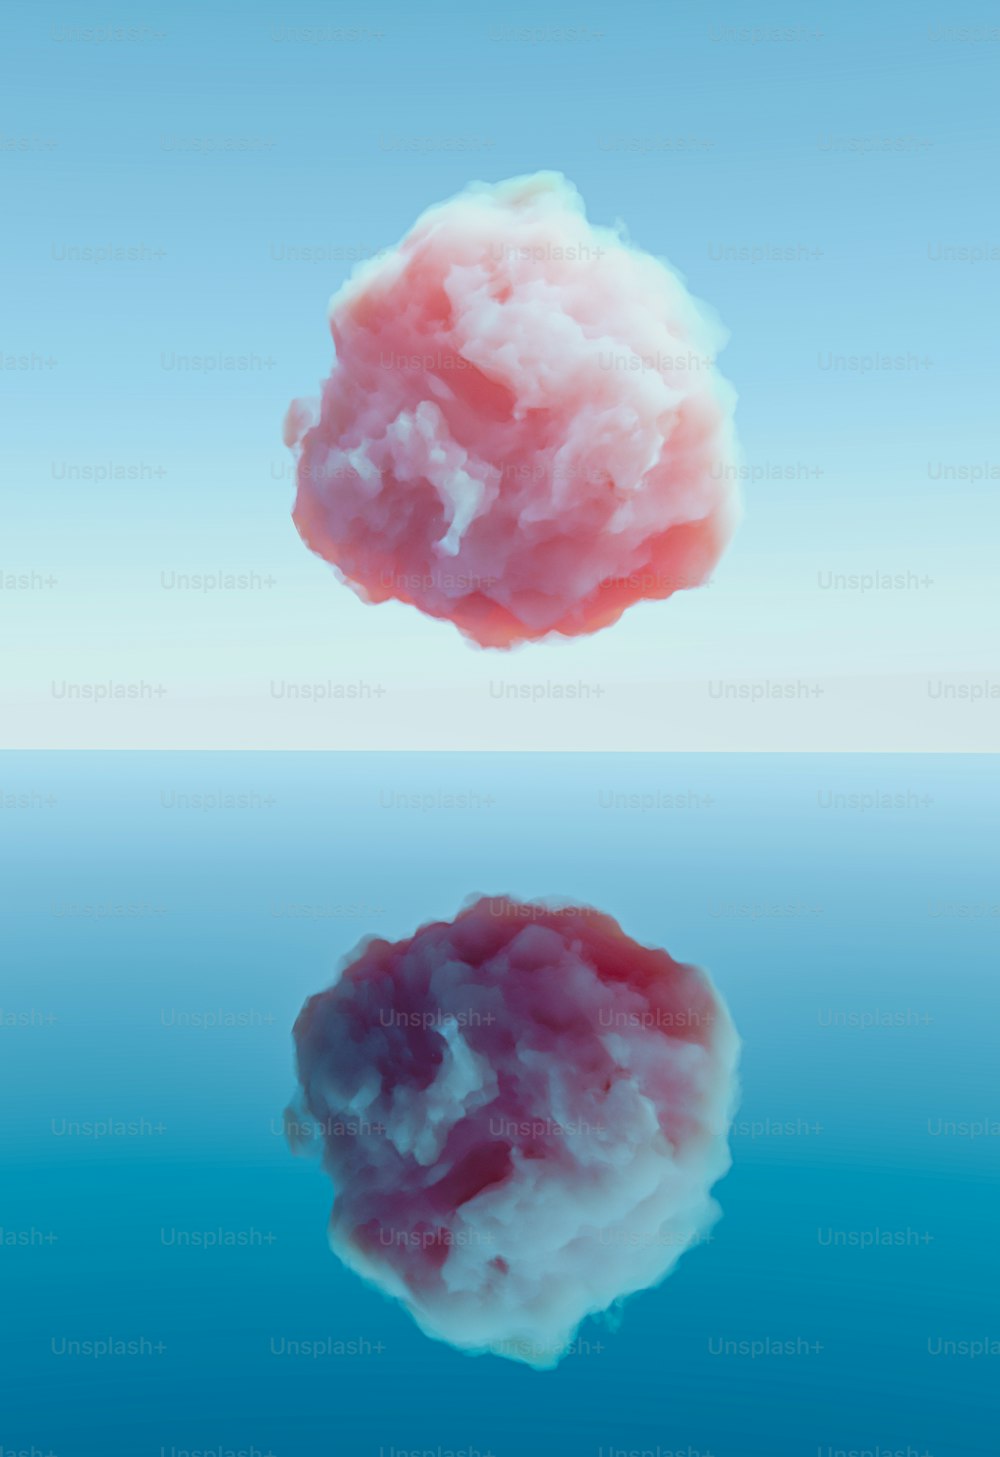 a pink cloud floating in the air over a body of water